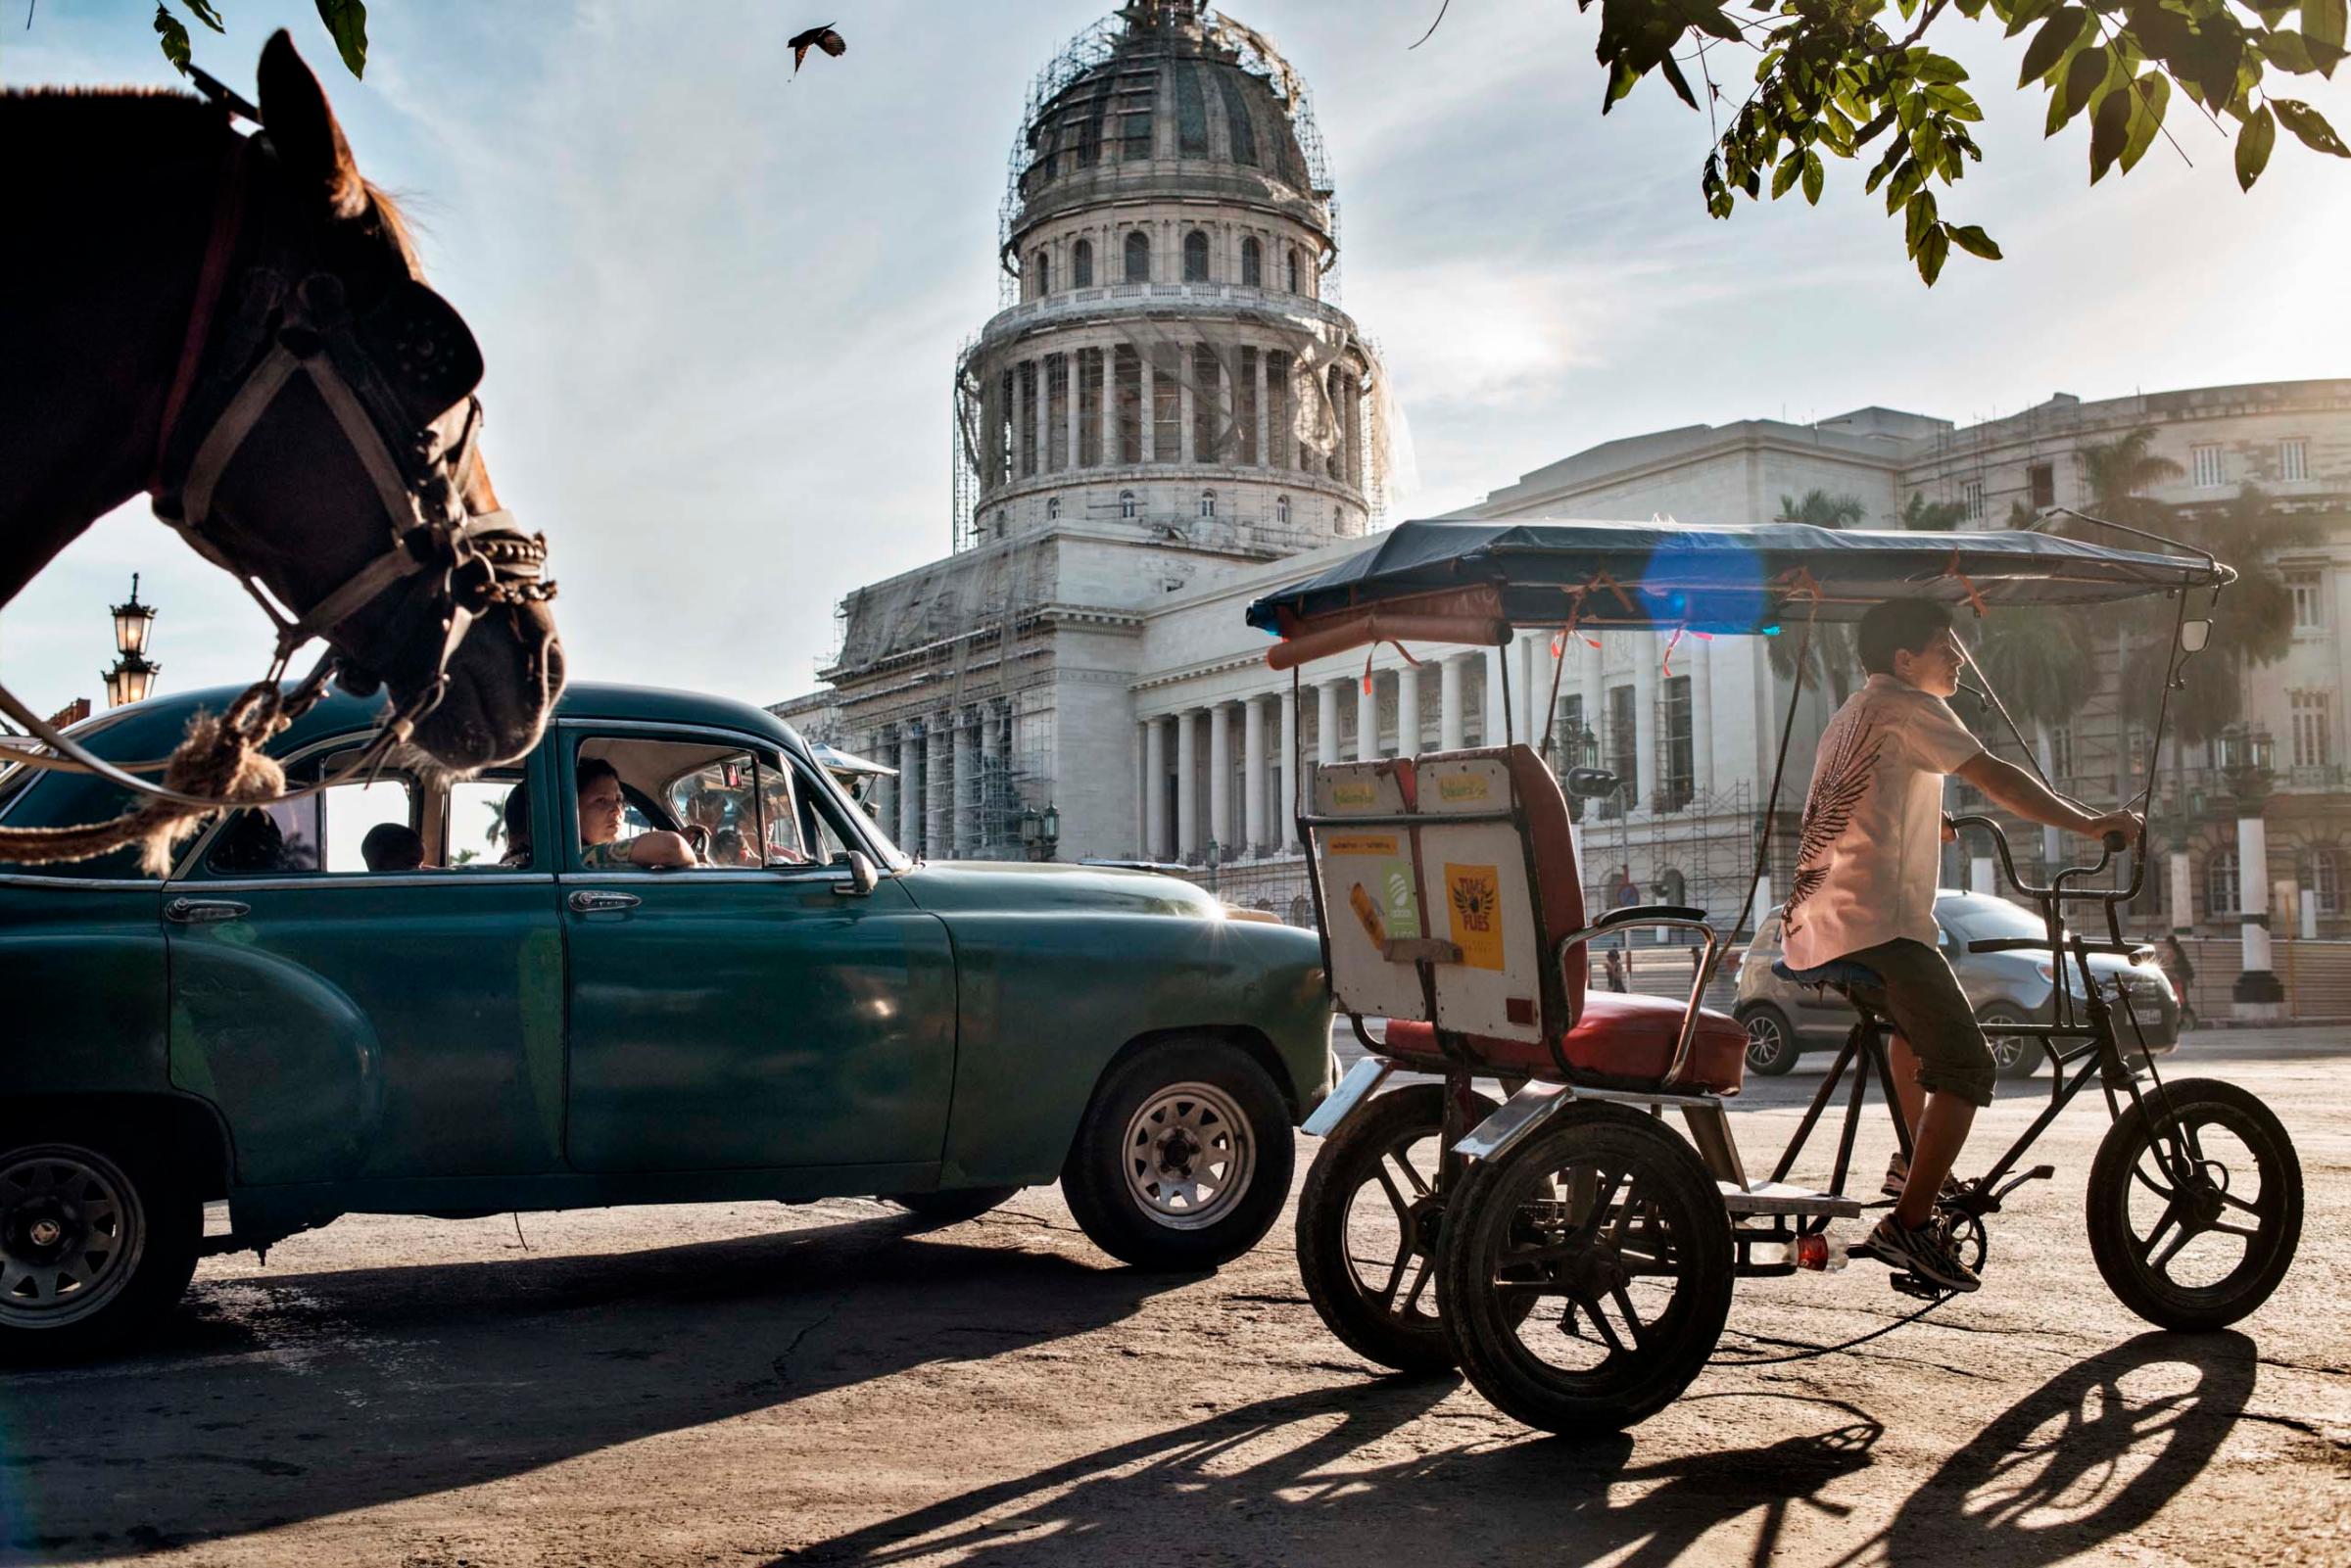 The National Cuban Capitol Building, El Capitolio, is being restored to house Cuba’s National Assembly, Havana, Cuba Dec. 2014.Yuri Kozyrev—NOOR for TIME